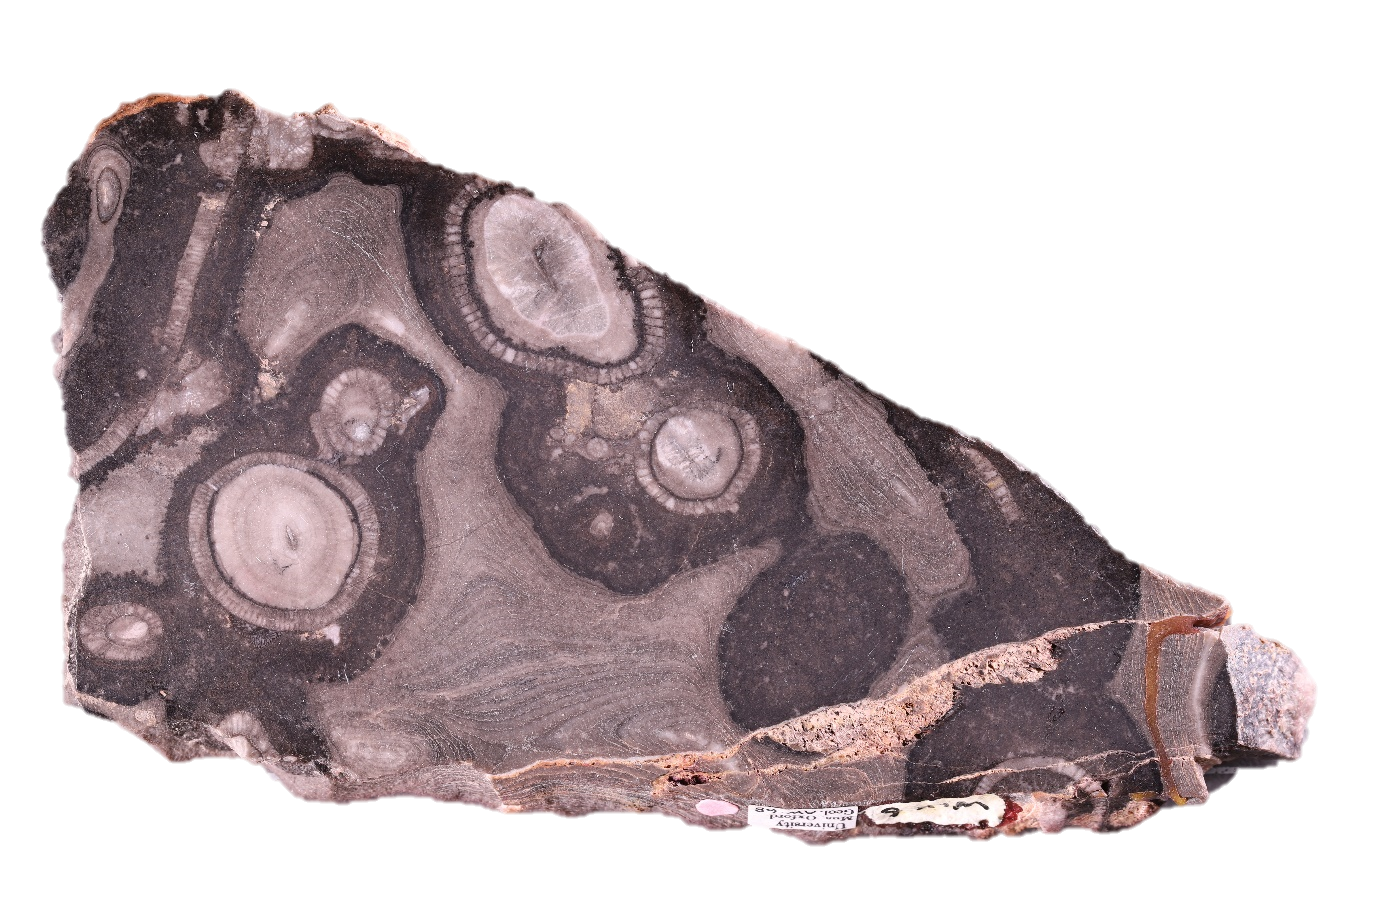 Fossil stromatolites and archaeocyathids from the Brasier Collection